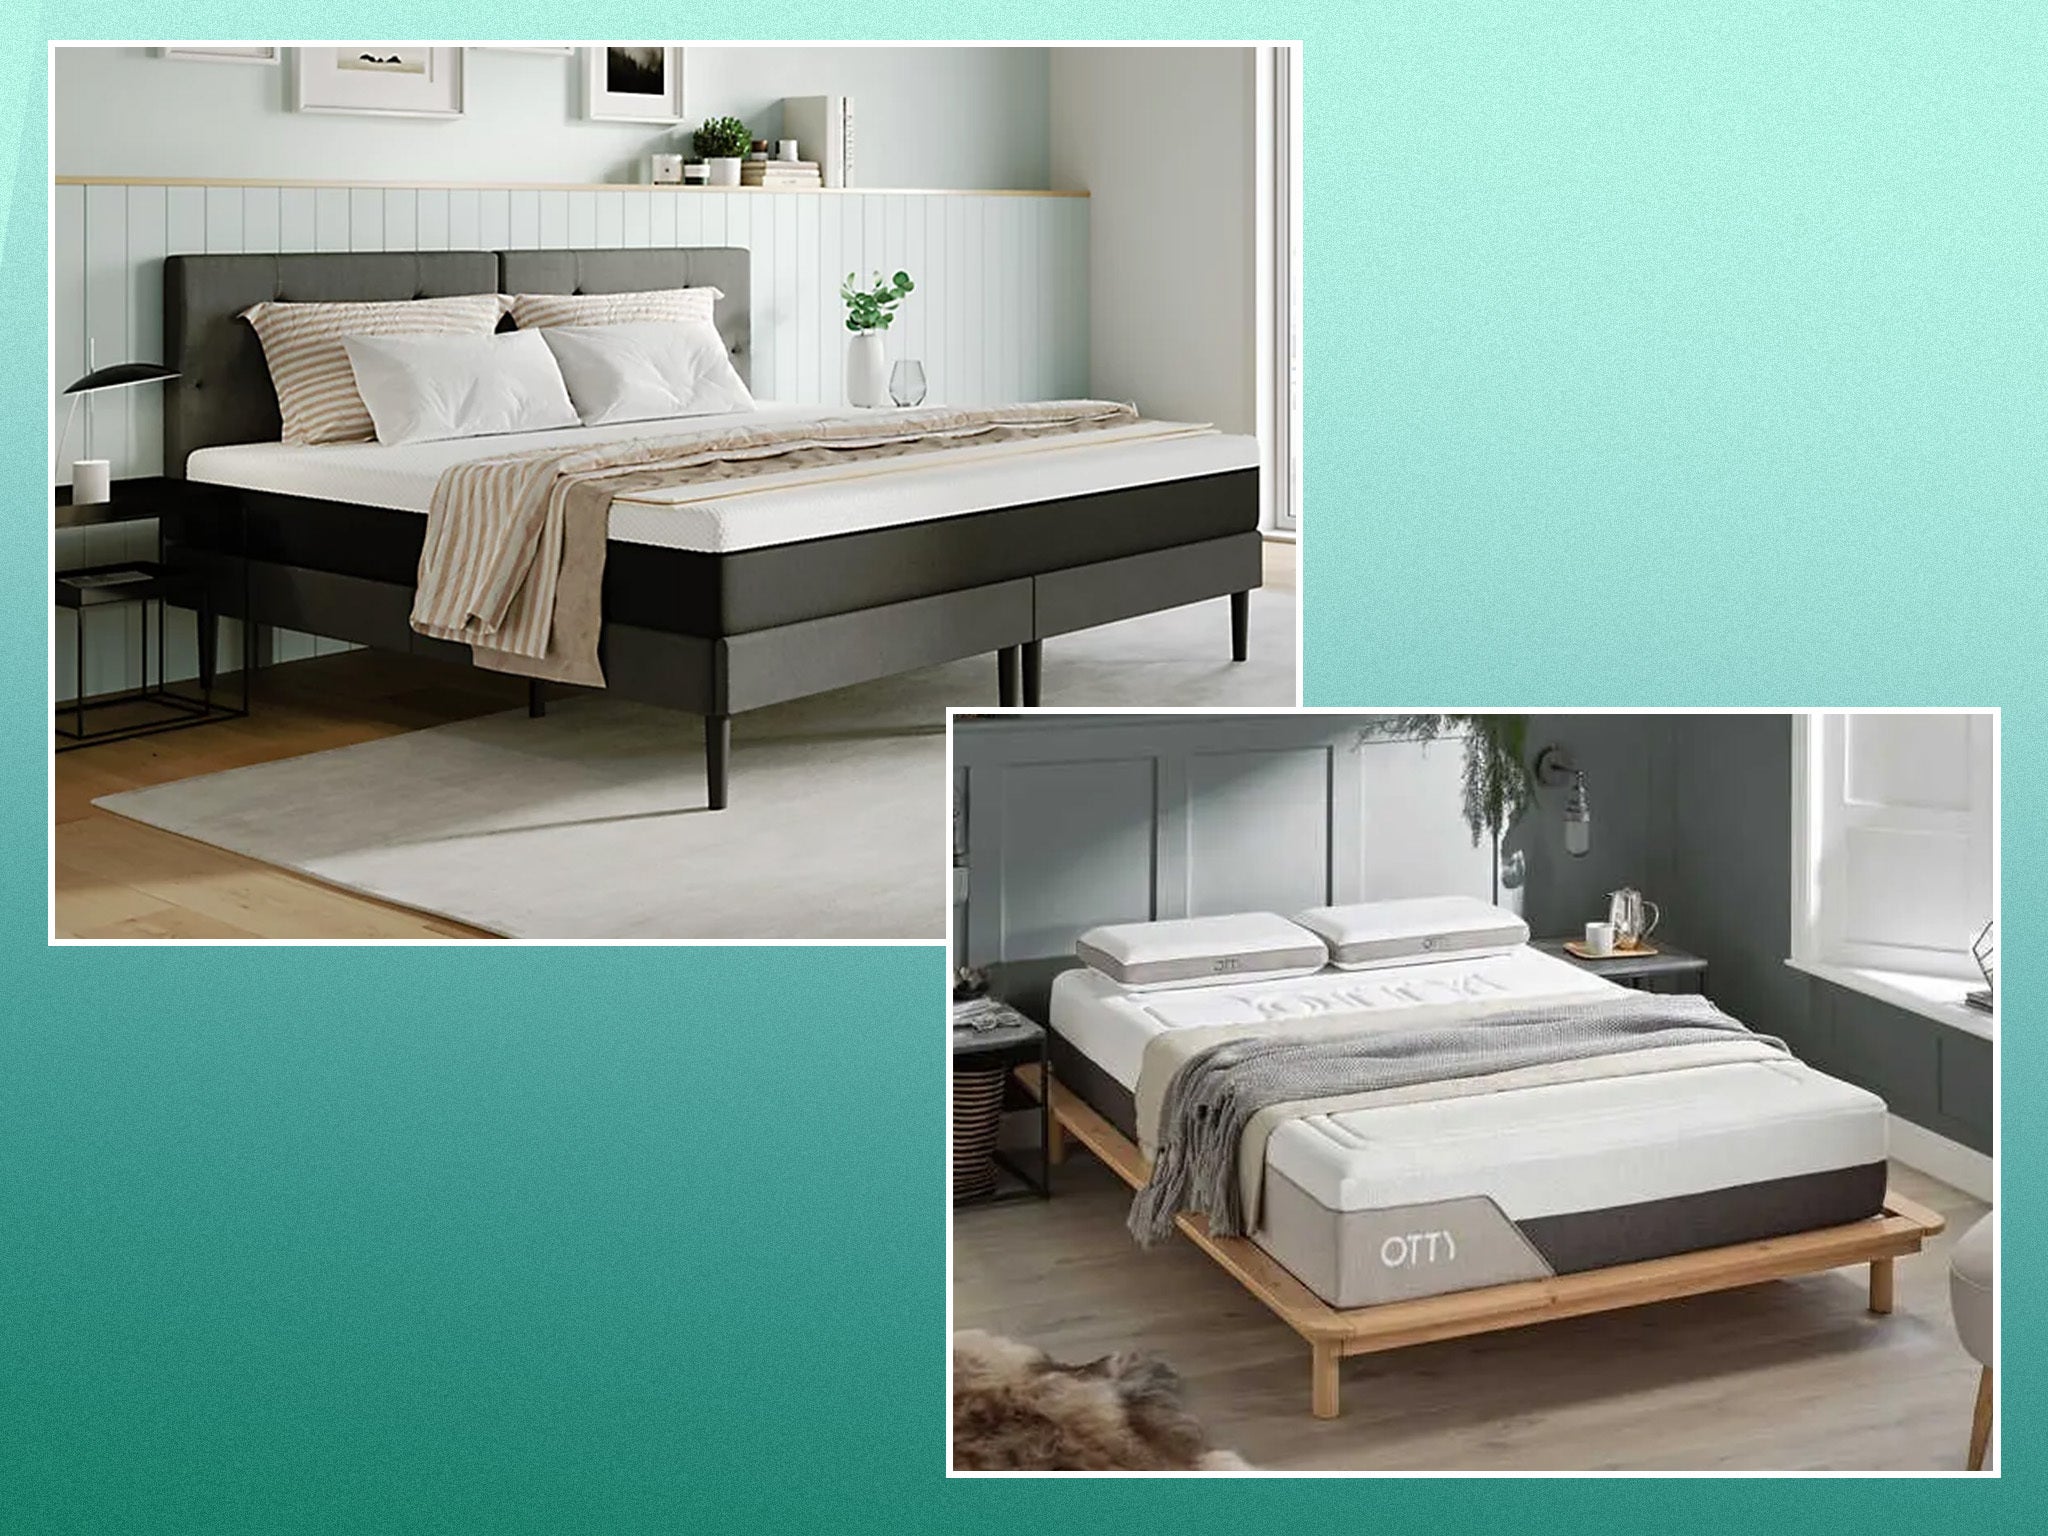 The cheap mattress deals to pick up in the July sales, from double to king size